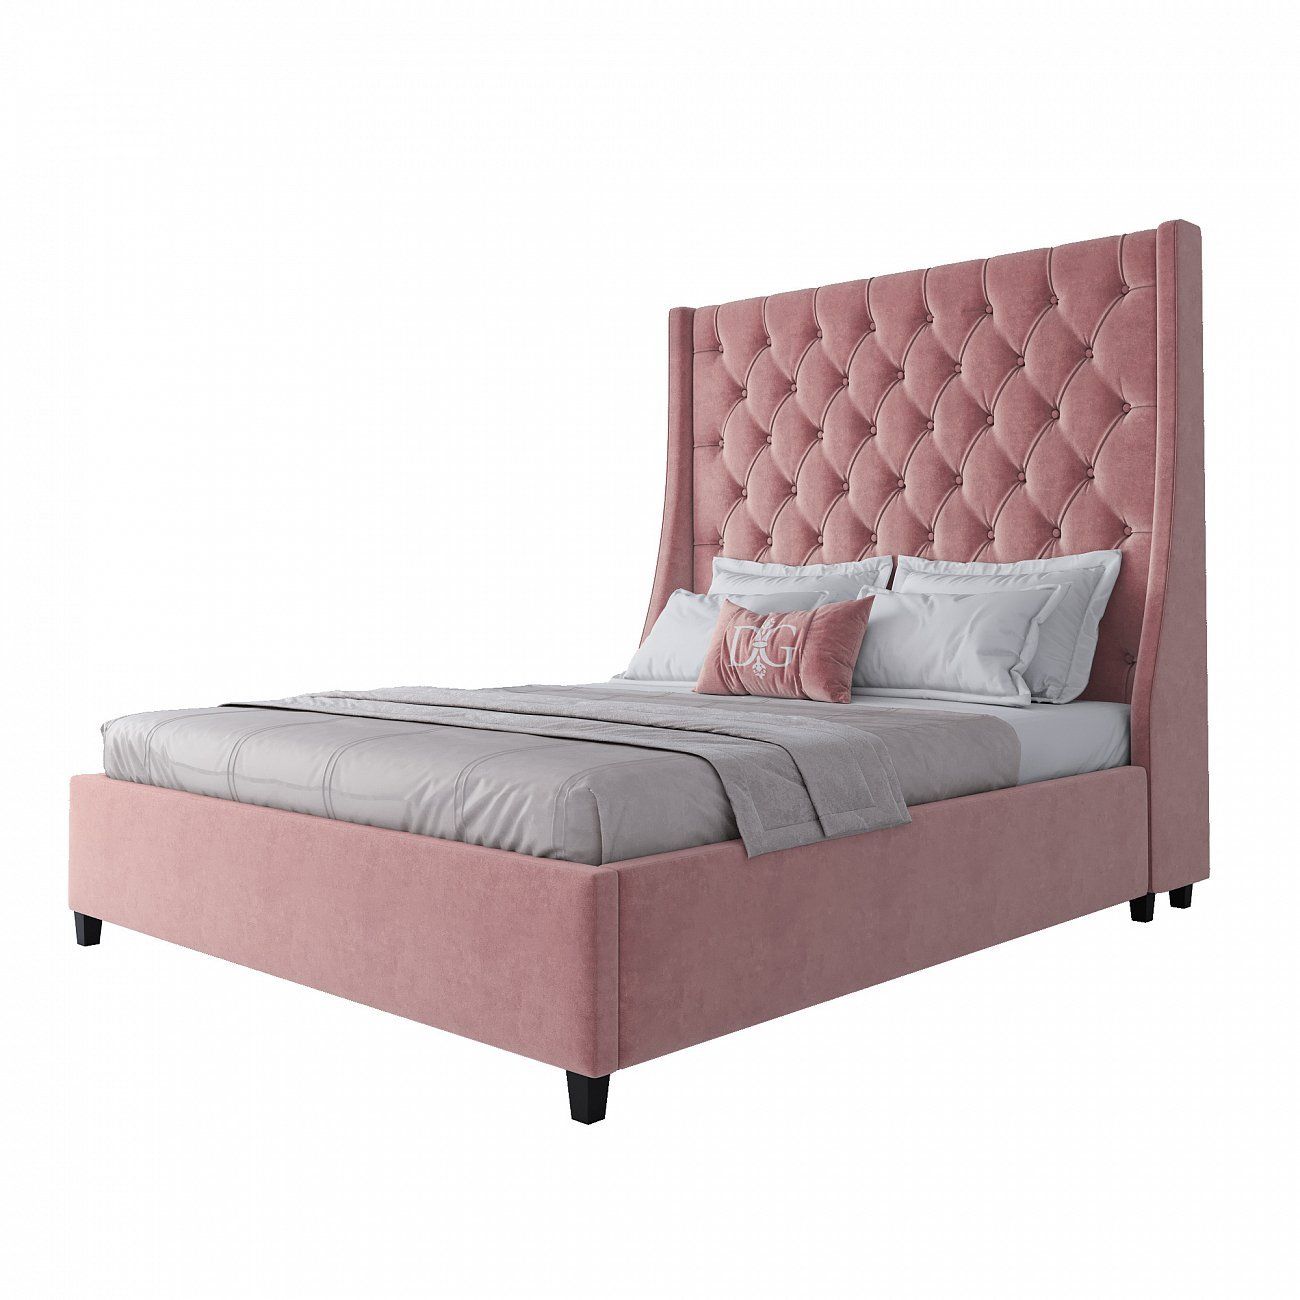 Double bed with upholstered headboard 160x200 cm pink Ada